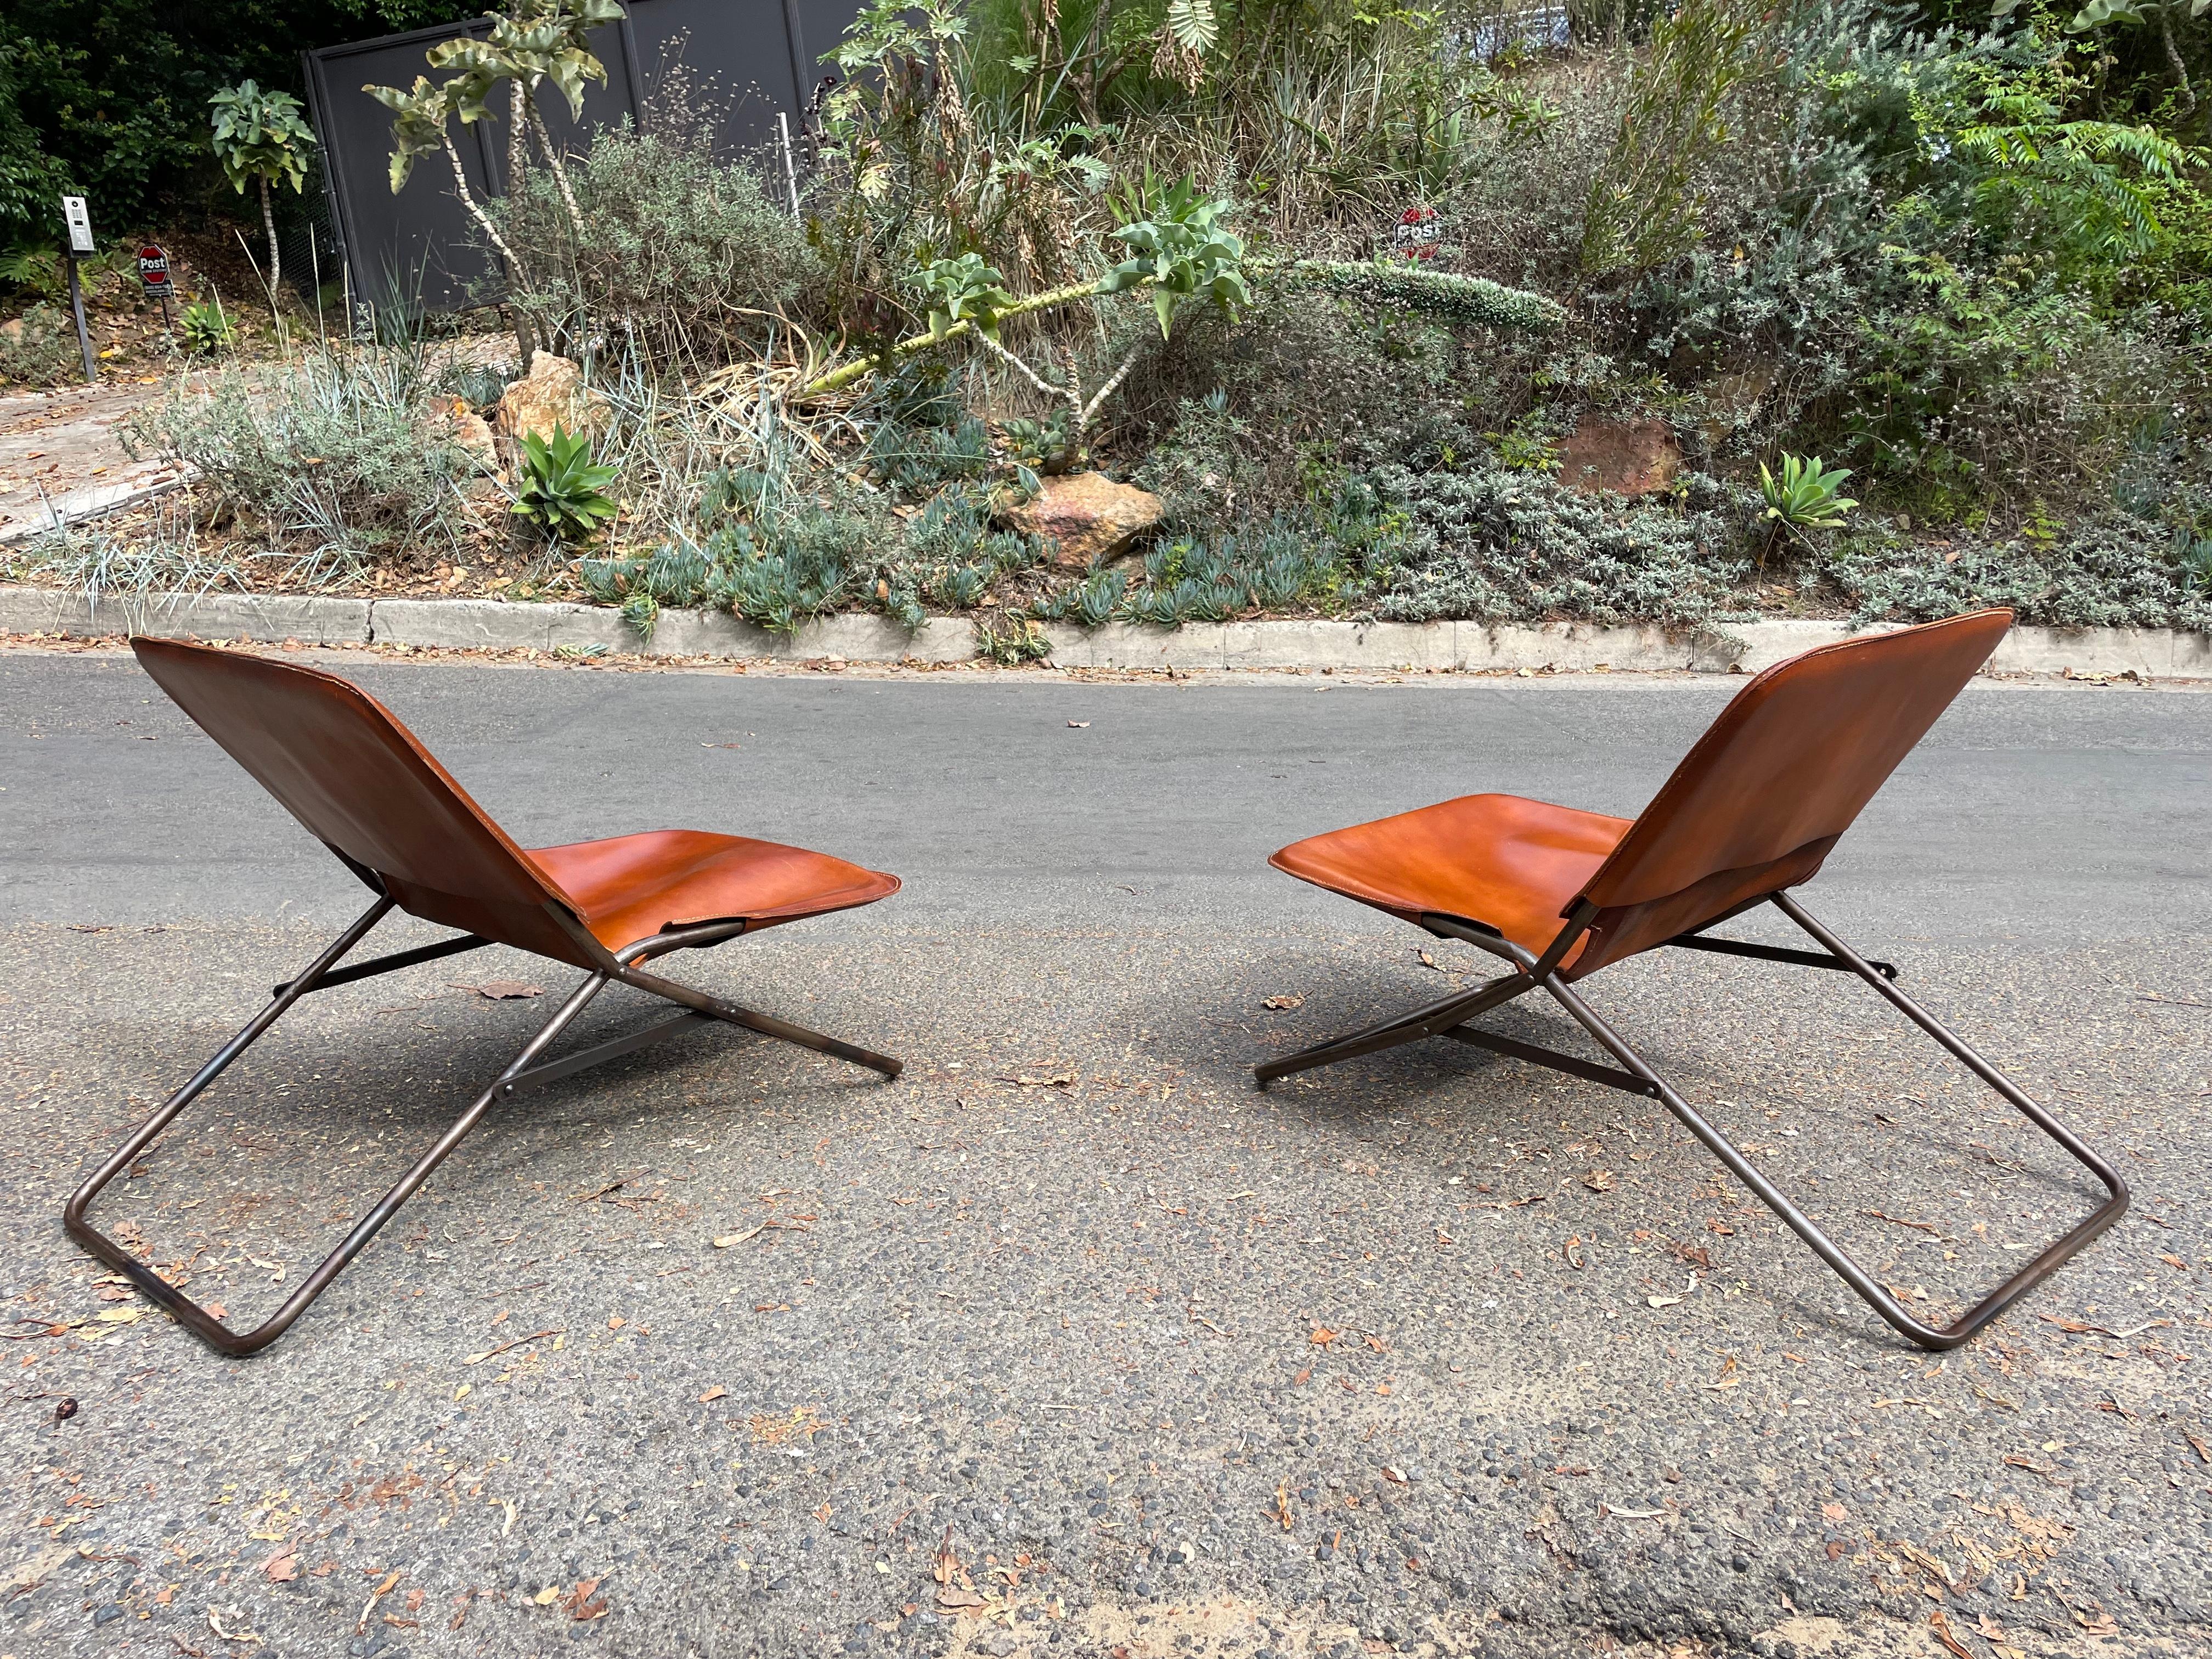 20th Century Vintage Lawson-Fenning Leather Sling Chairs